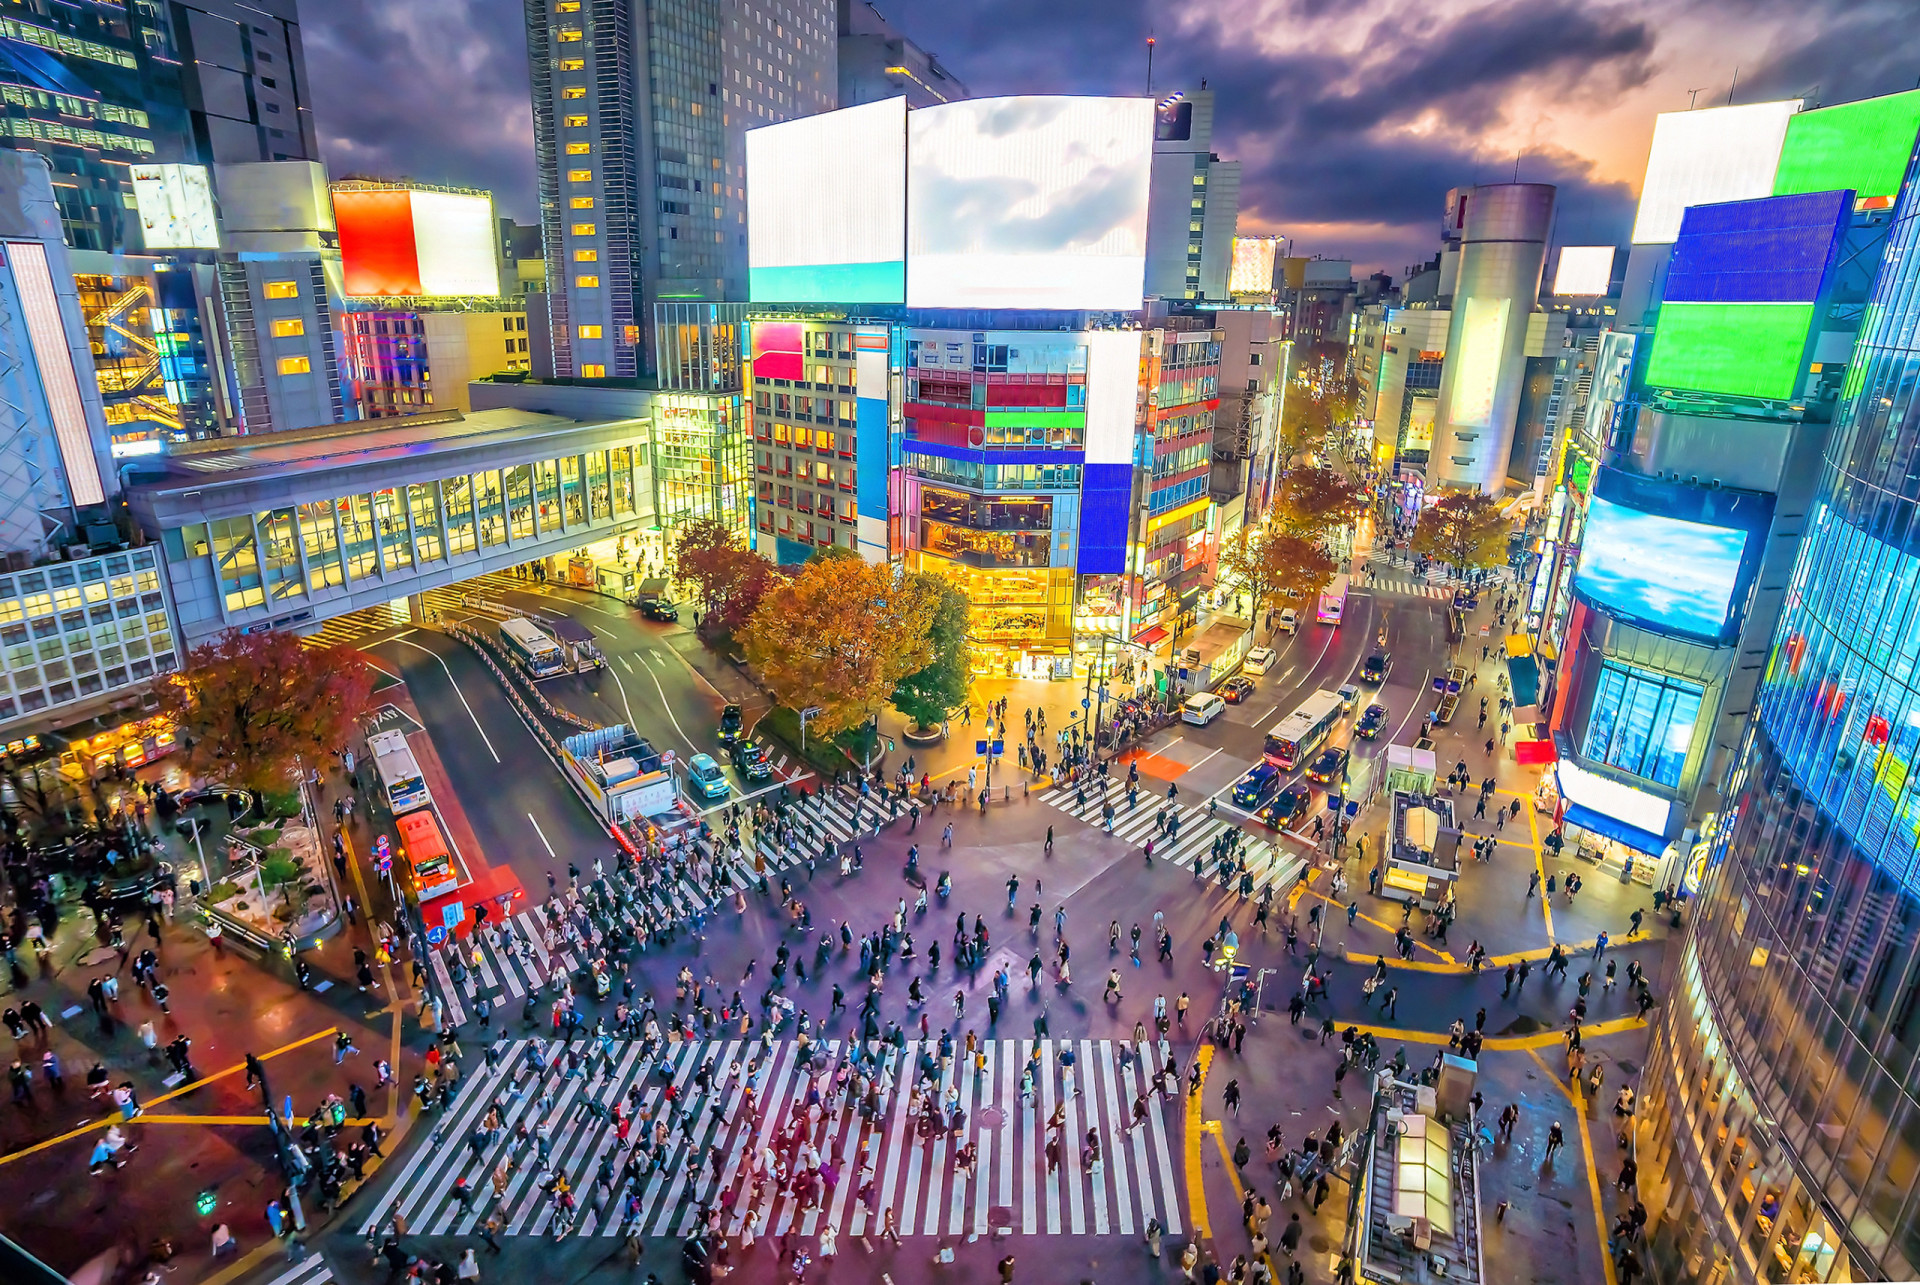 <p>Haruki Murakami's novels, including 'Norwegian Wood,' often feature modern Tokyo as a backdrop. Tokyo's vibrant neighborhoods, like Shibuya and Nakano, mirror the eclectic and sometimes surreal experiences of Murakami's characters.</p> <p>Sources: (BuzzFeed) (Huff Post) (Pan MacMillan)</p> <p>See also: <a href="https://www.starsinsider.com/movies/496279/movies-set-in-americas-deep-south">Movies set in America's Deep South</a></p><p><a href="https://www.msn.com/en-us/community/channel/vid-7xx8mnucu55yw63we9va2gwr7uihbxwc68fxqp25x6tg4ftibpra?cvid=94631541bc0f4f89bfd59158d696ad7e">Follow us and access great exclusive content every day</a></p>